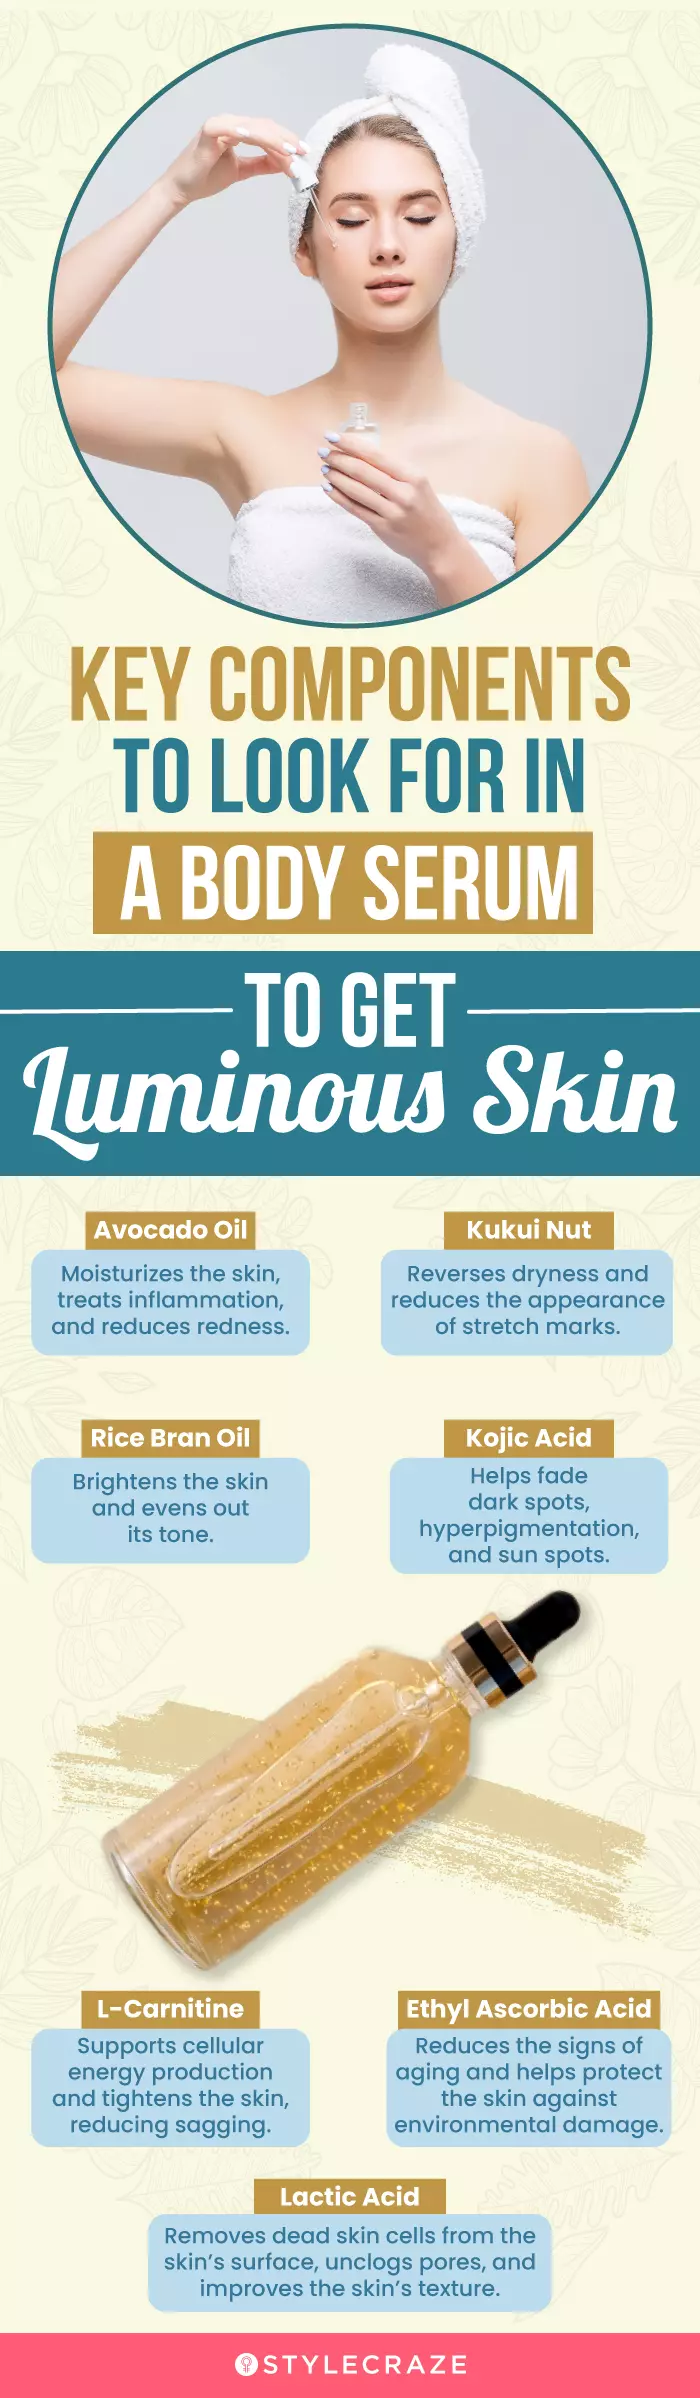 Key Components To Look For In A Body Serum(infographic)